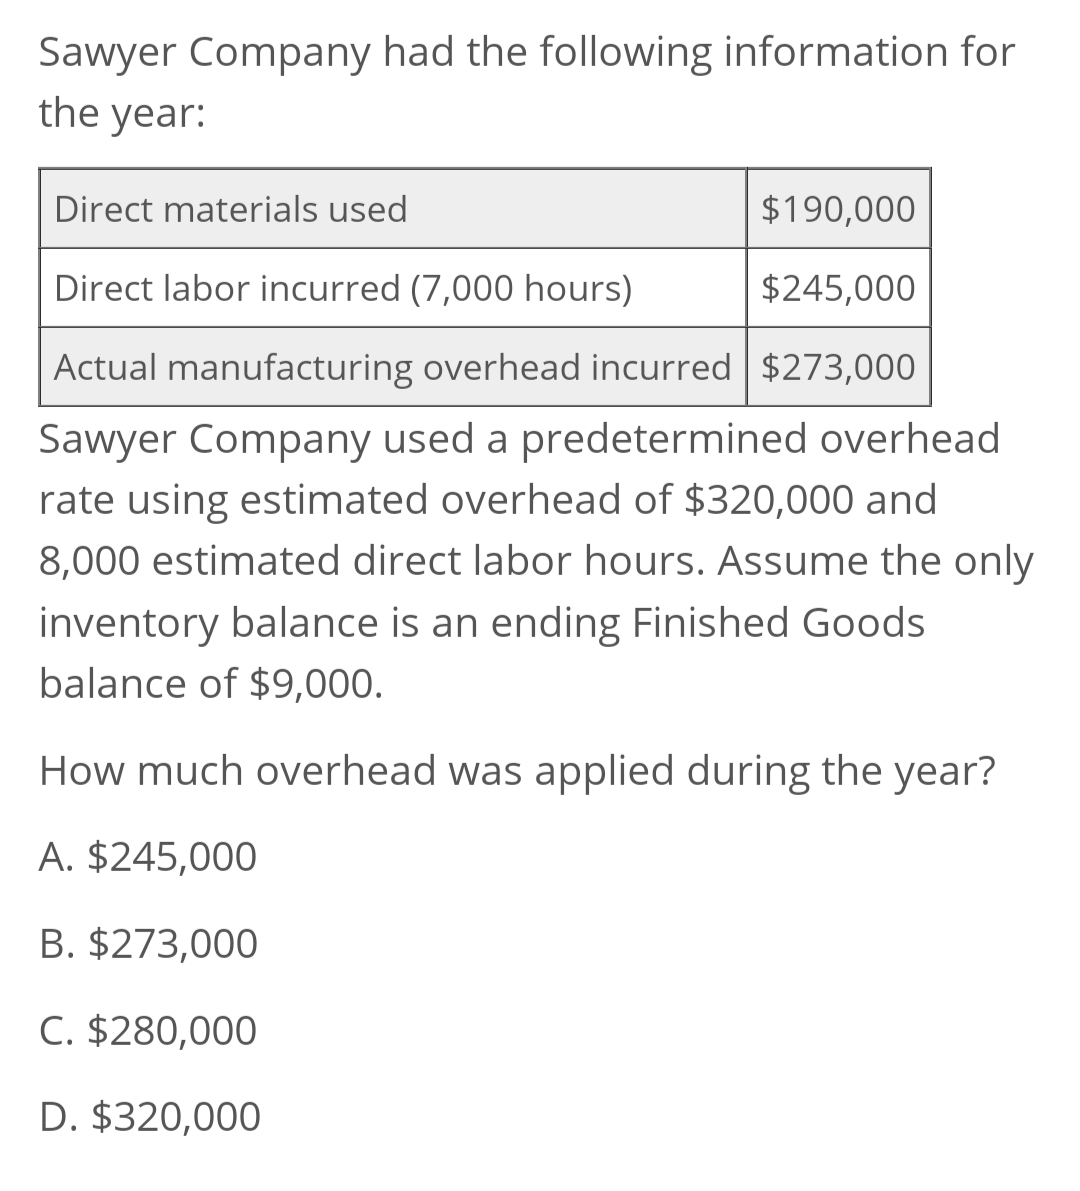 Sawyer Company had the following information for
the year:
Direct materials used
$190,000
Direct labor incurred (7,000 hours)
$245,000
Actual manufacturing overhead incurred $273,000
Sawyer Company used a predetermined overhead
rate using estimated overhead of $320,000 and
8,000 estimated direct labor hours. Assume the only
inventory balance is an ending Finished Goods
balance of $9,000.
How much overhead was applied during the year?
A. $245,000
B. $273,000
C. $280,000
D. $320,000
